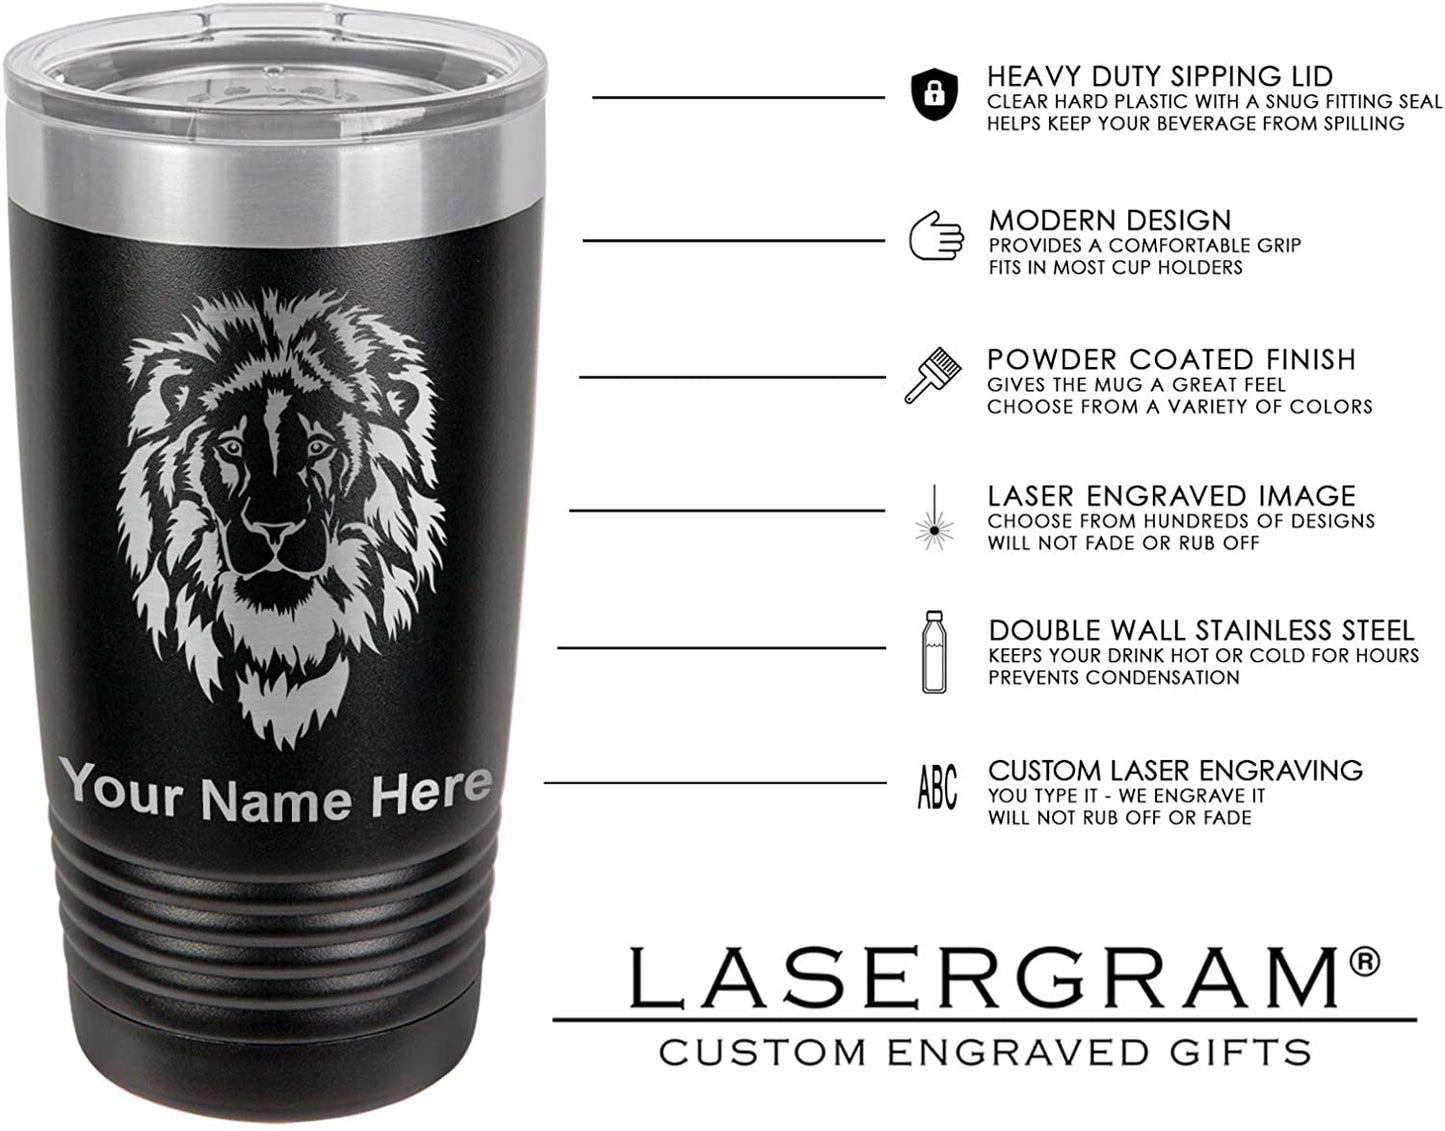 20oz Vacuum Insulated Tumbler Mug, Flag of Puerto Rico, Personalized Engraving Included